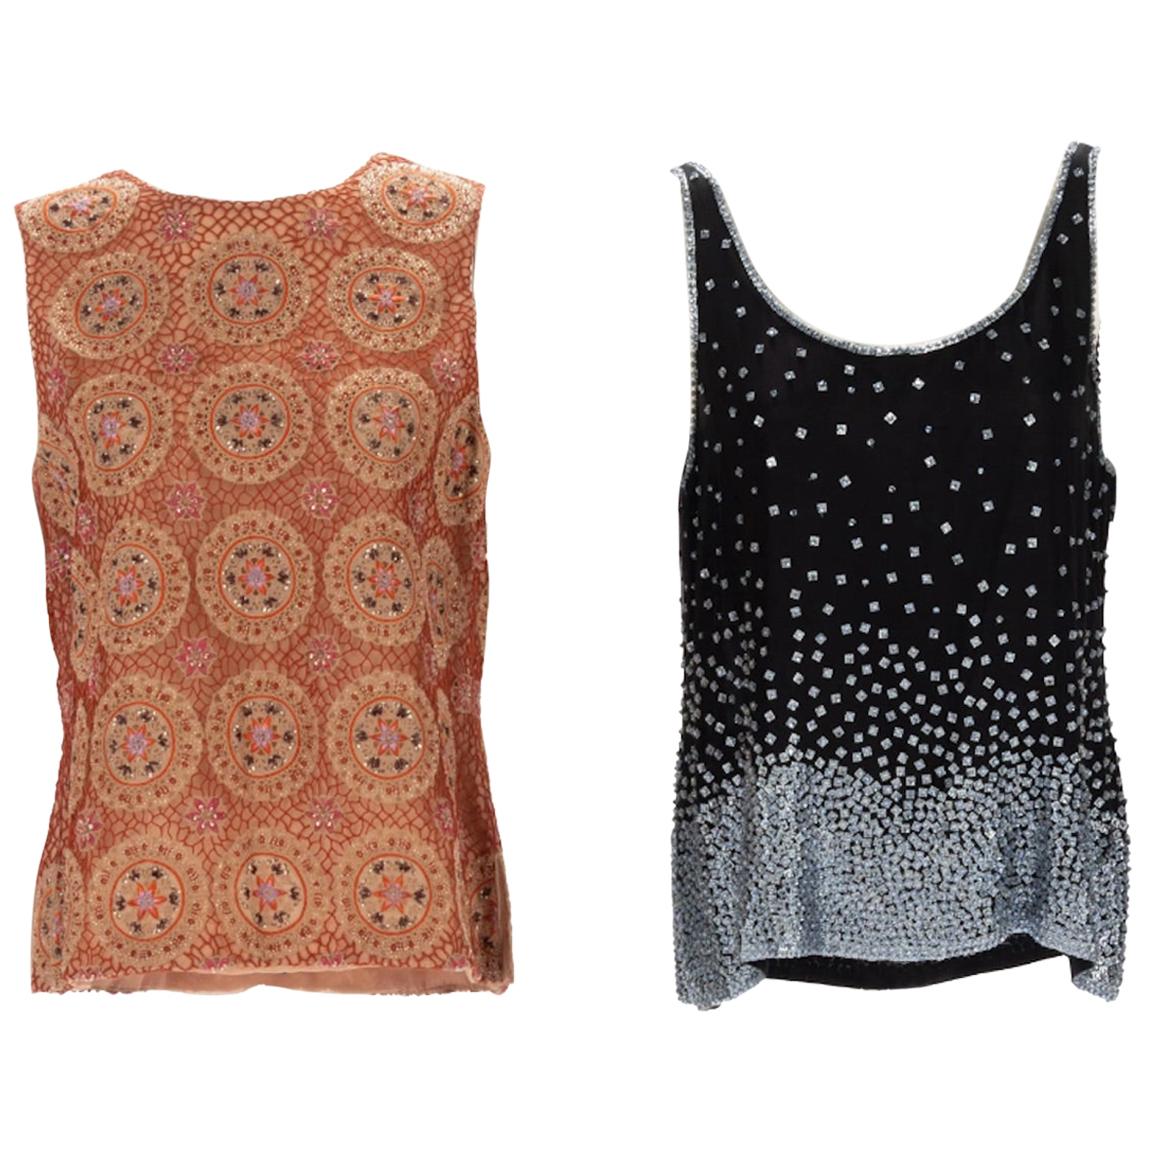 Two Bill Blass Couture Beaded Tops.  New Still Retaining Their Original Pricetag